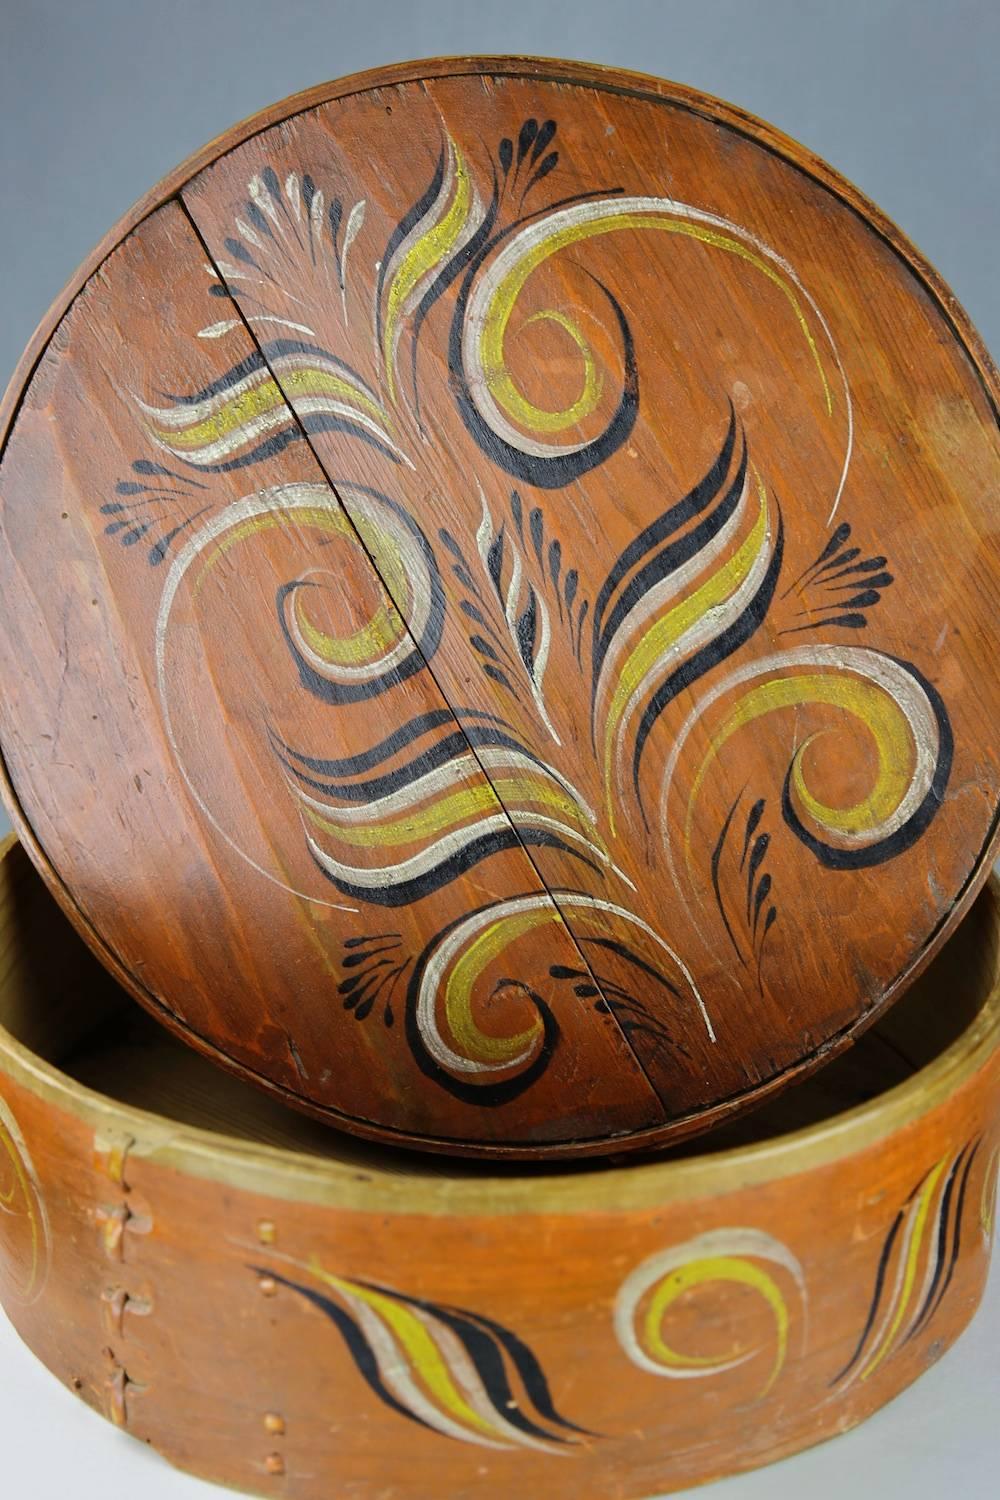 19th Century Round Painted Scandinavian Bentwood Rosemaling Pantry Box / Tine In Excellent Condition For Sale In Henley-on-Thames, Oxfordshire